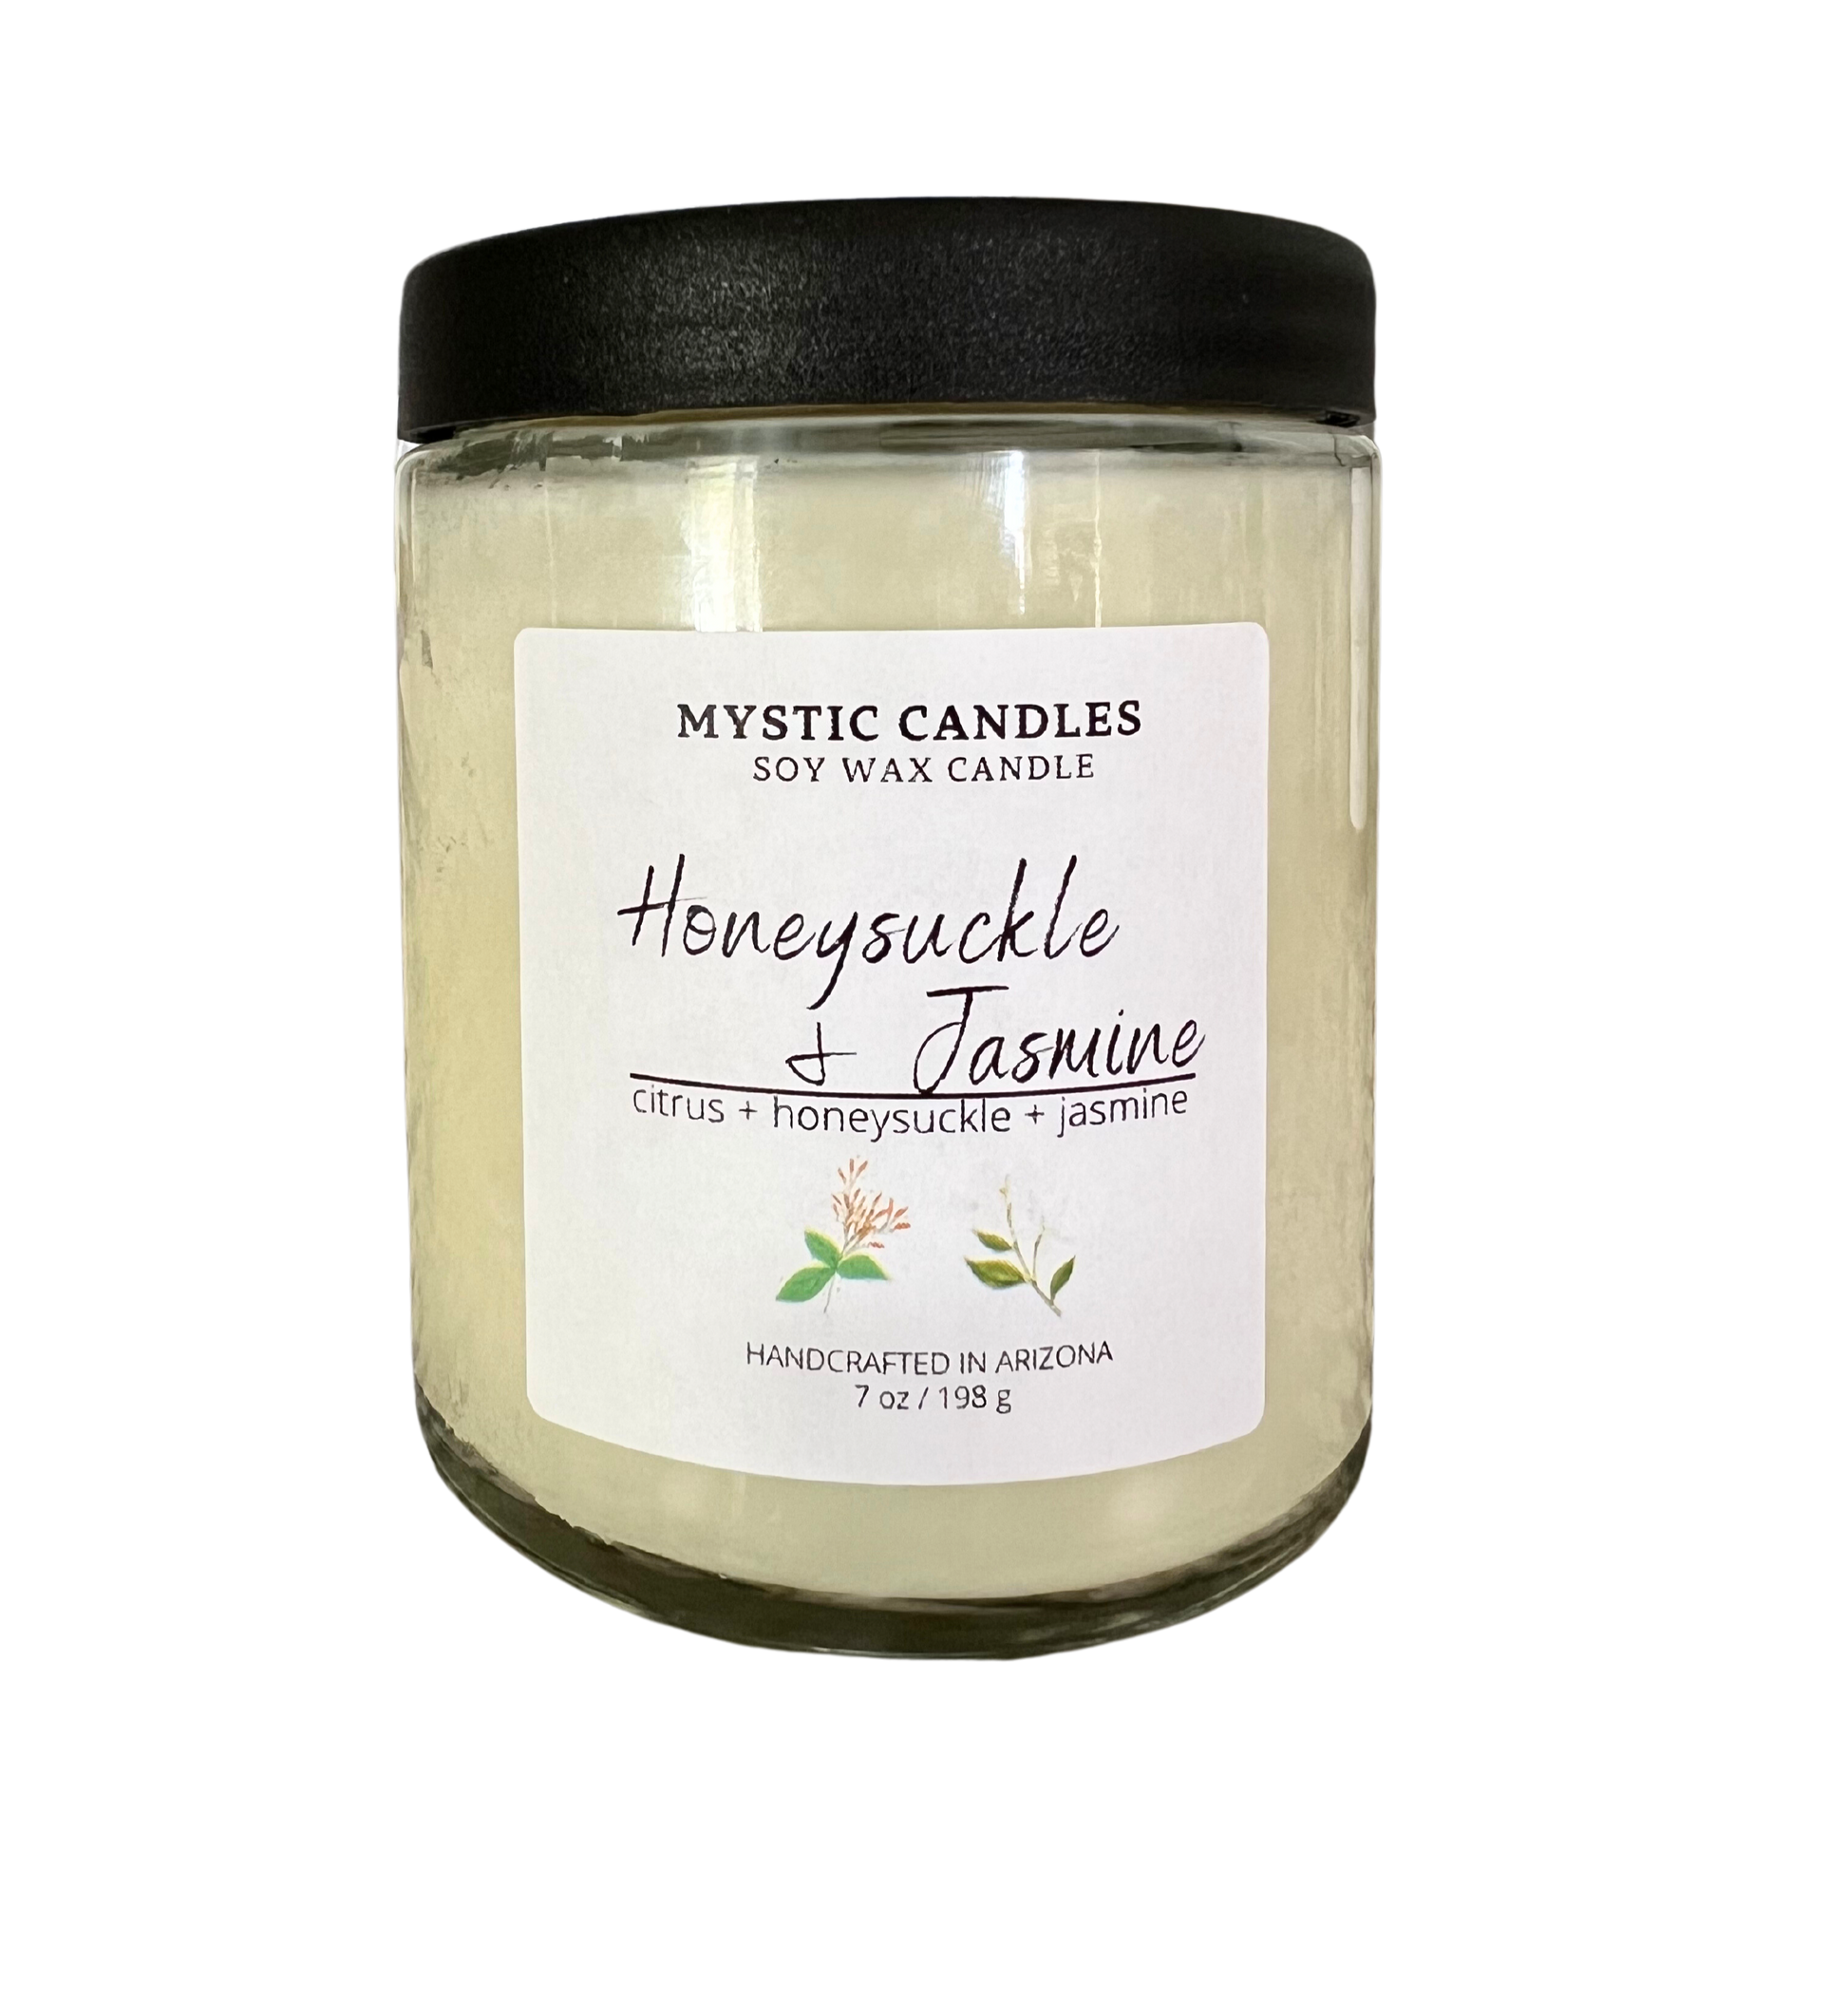 Honeysuckle & Jasmine Candle - Mystic Candles and Soaps LLC